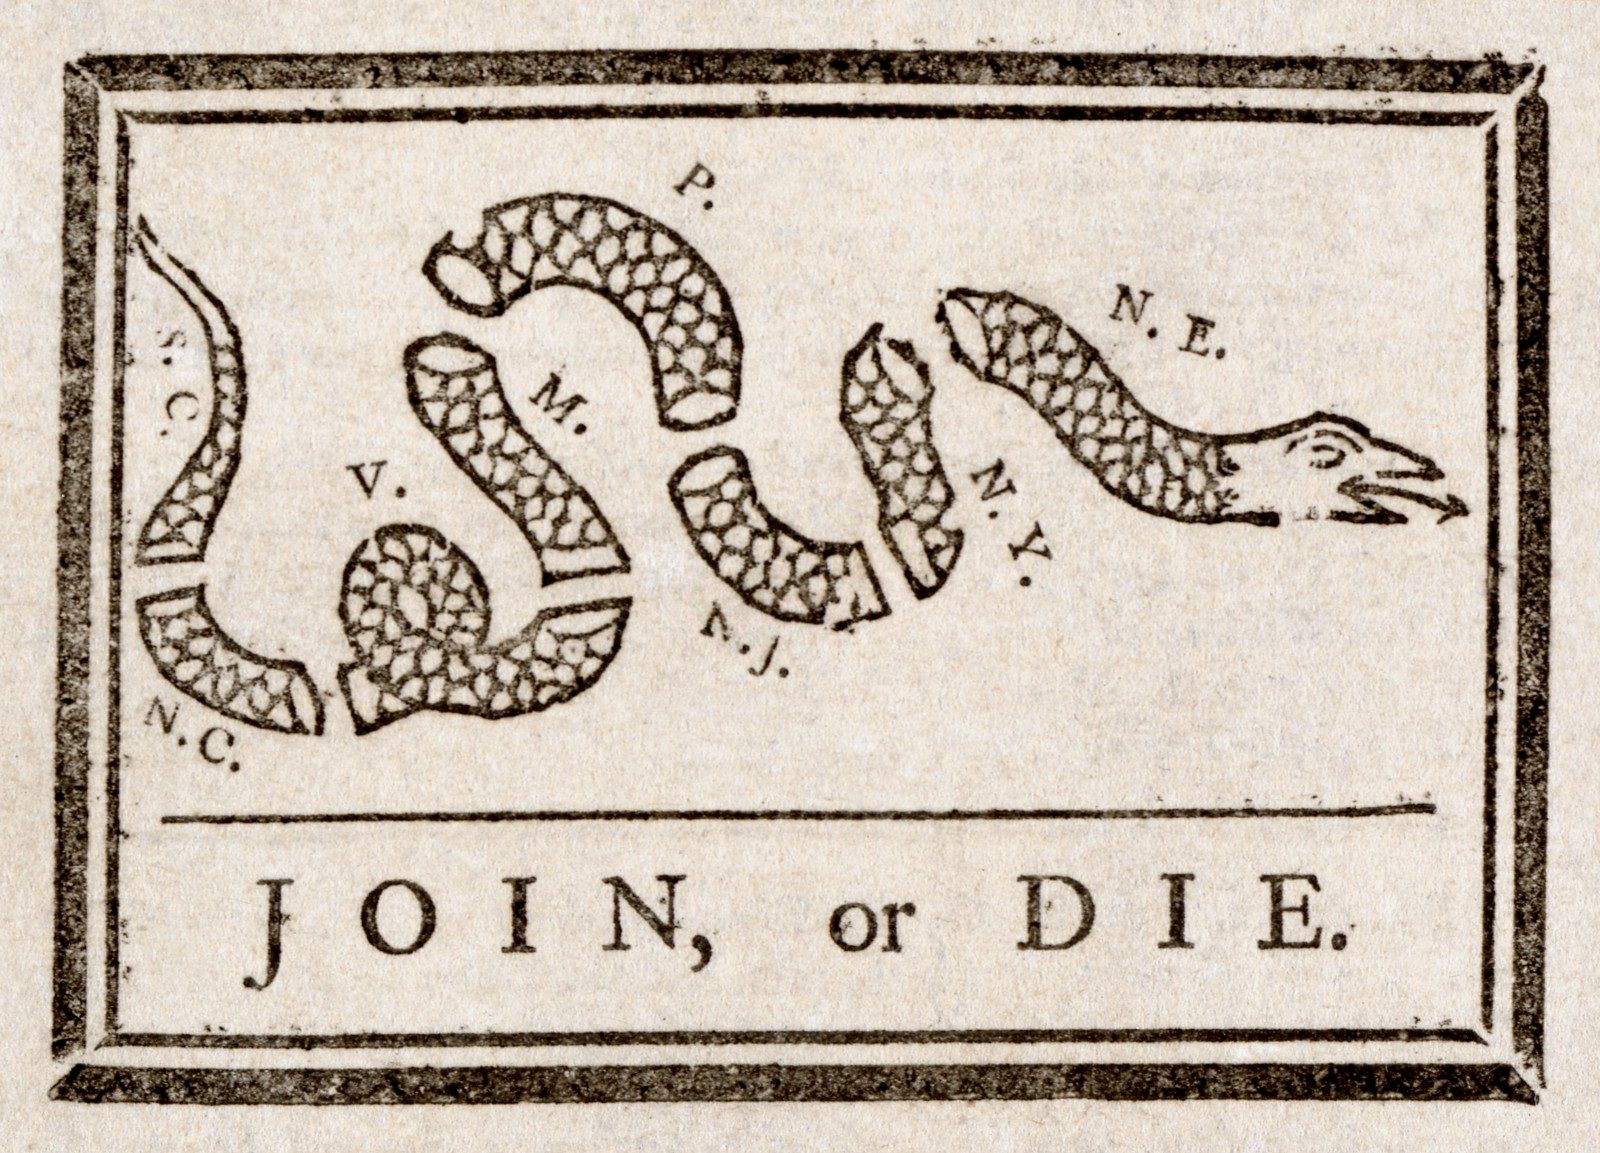 Benjamin Franklin's Famous Cartoon on the need to unite the 13 original American colonies